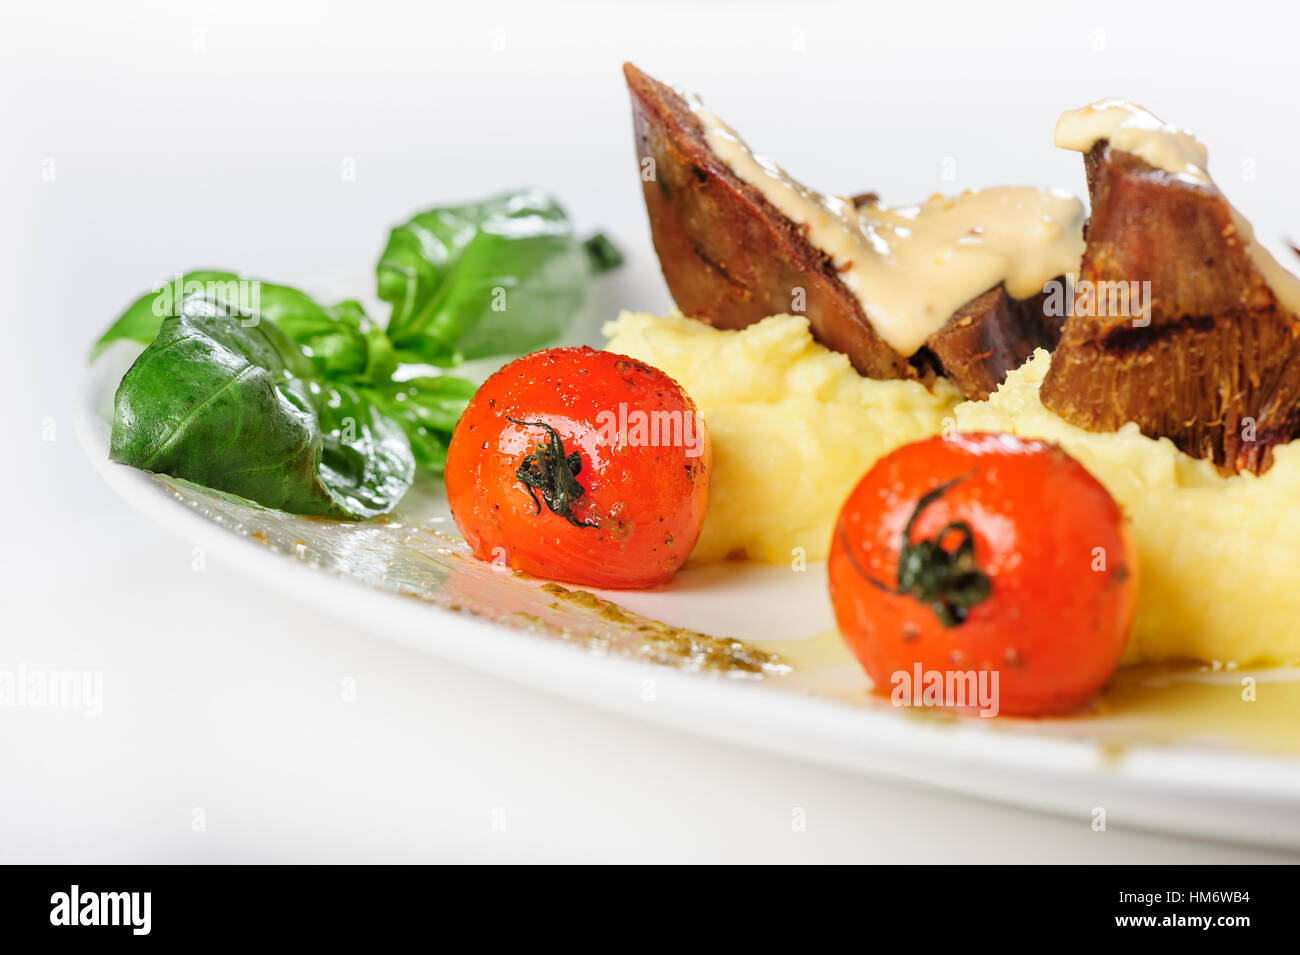 Baked mutton meat with creamy sauce, mashed potato and cherry tomatoes Stock Photo